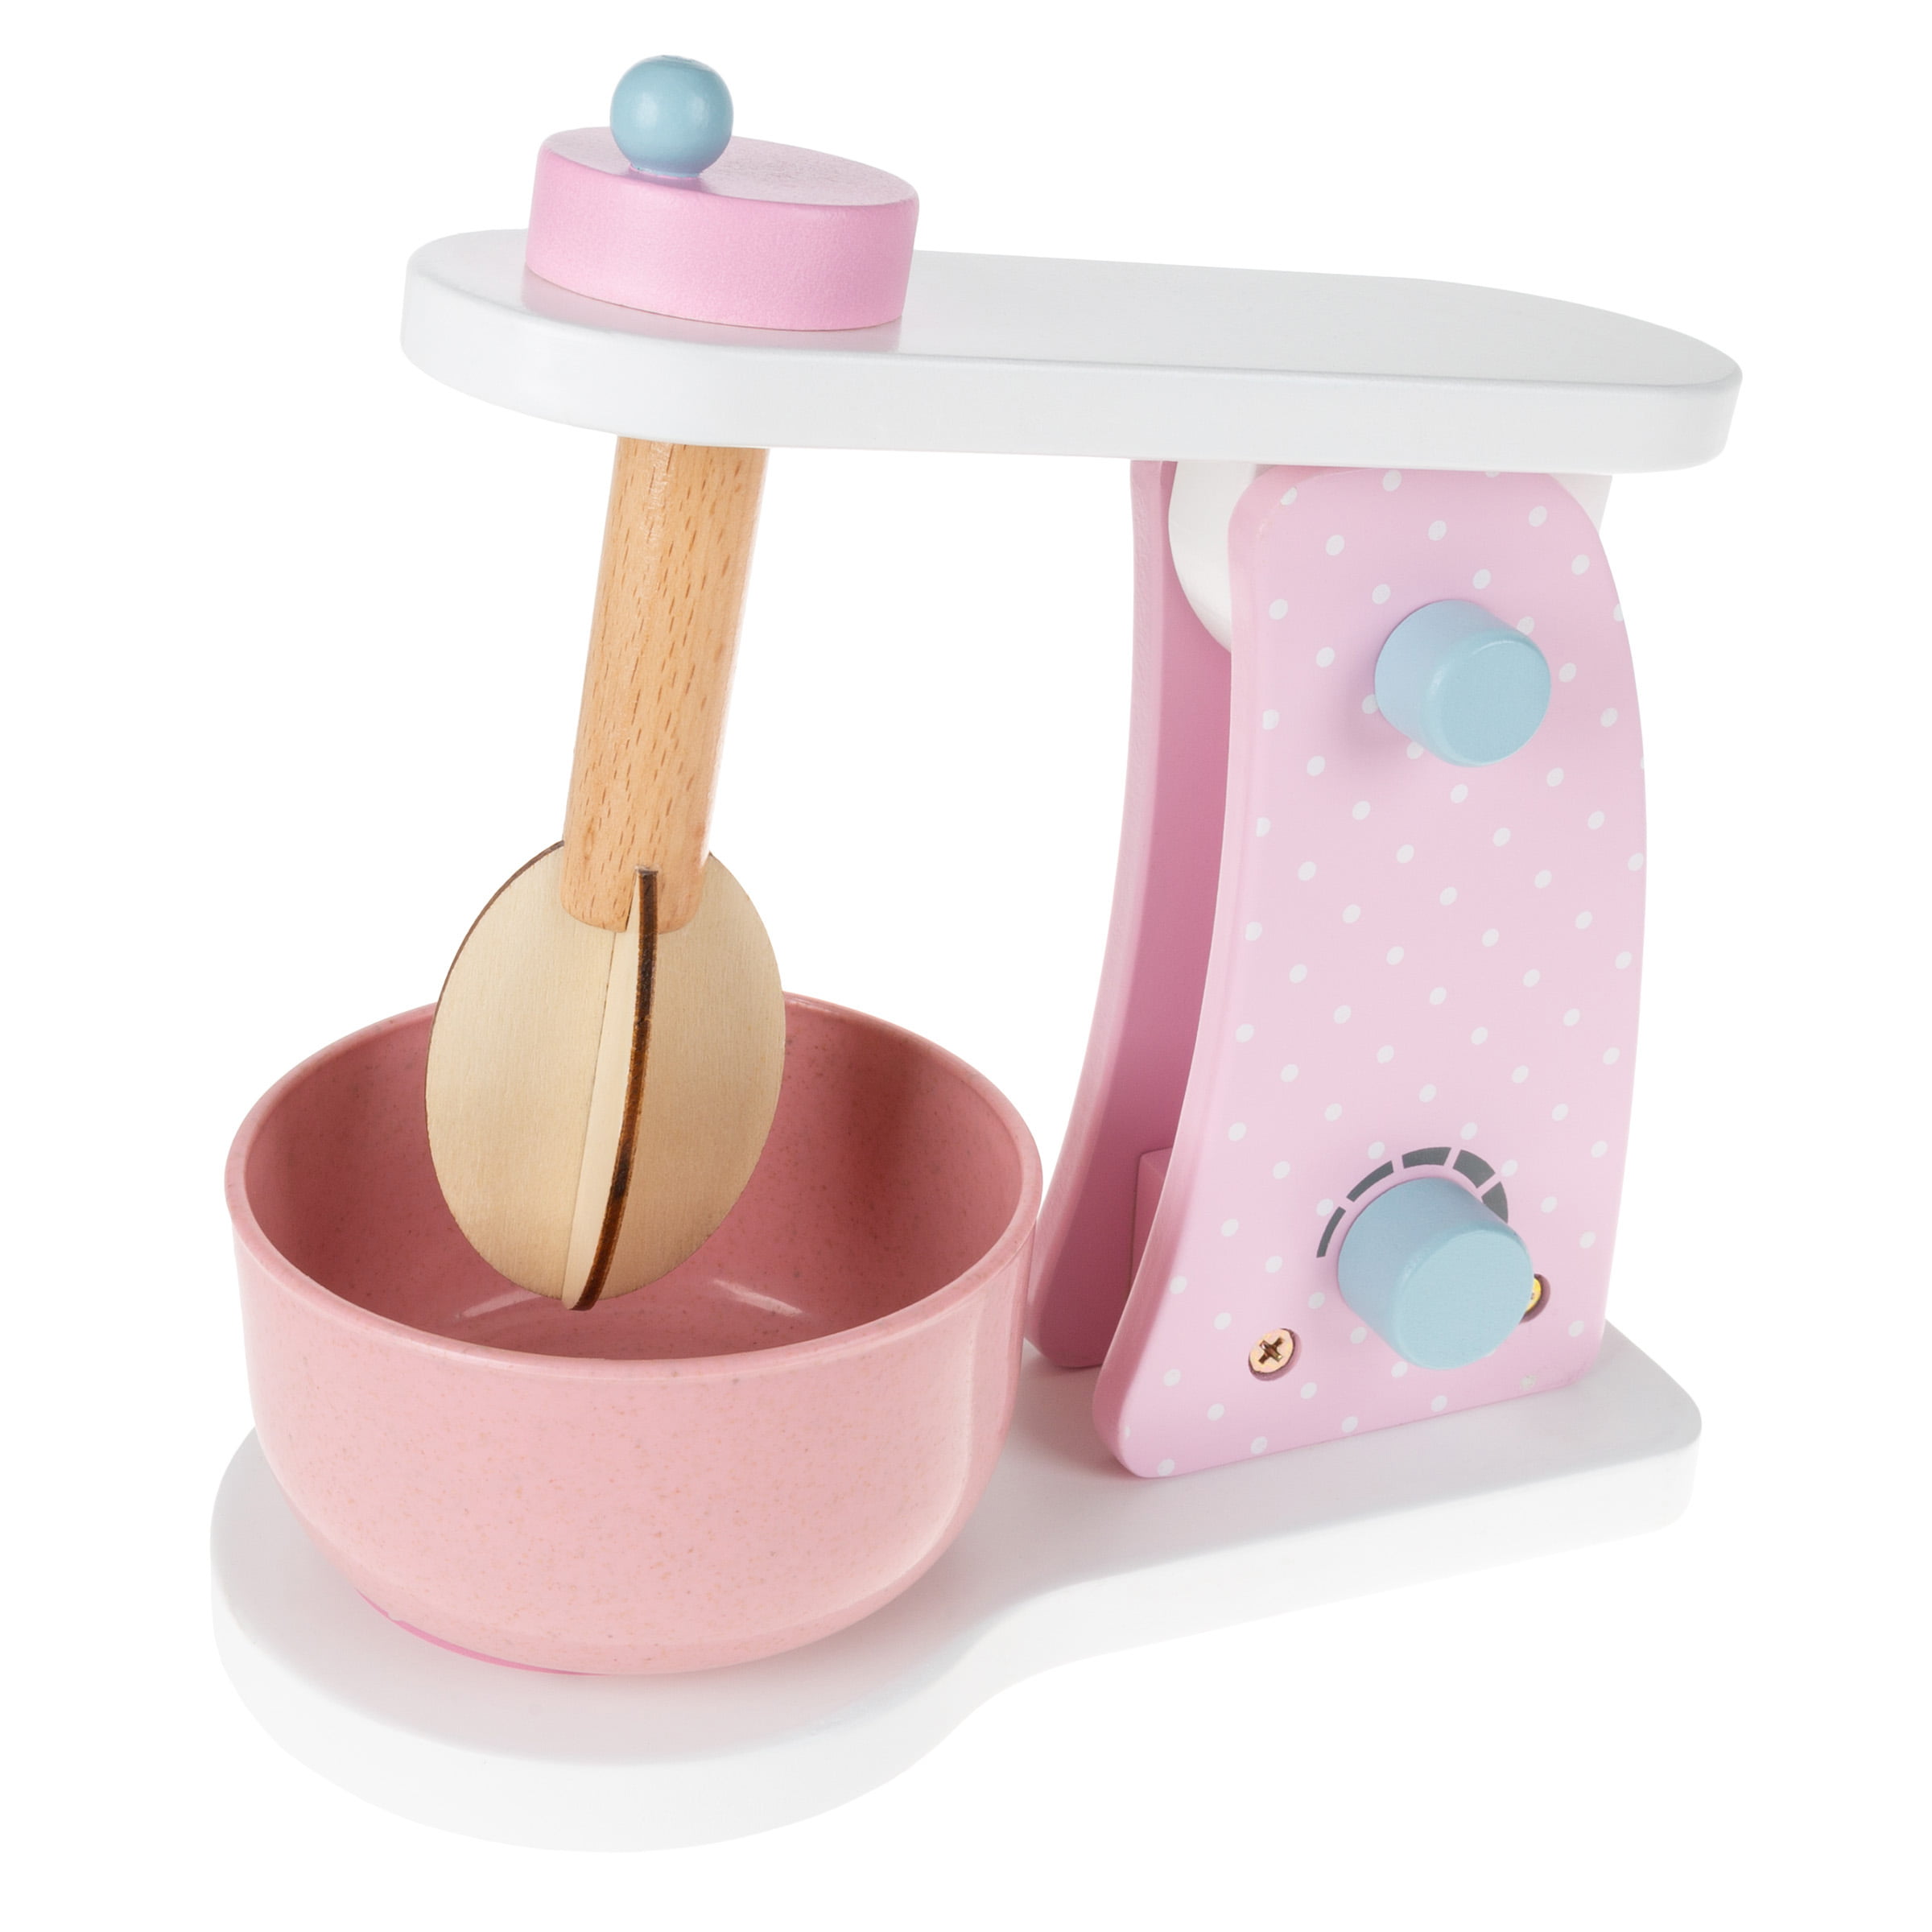 Pretend Play Mixer - Kids Wooden Pastel Stand Mixer with Mixing Bowl by  Hey! Play! 